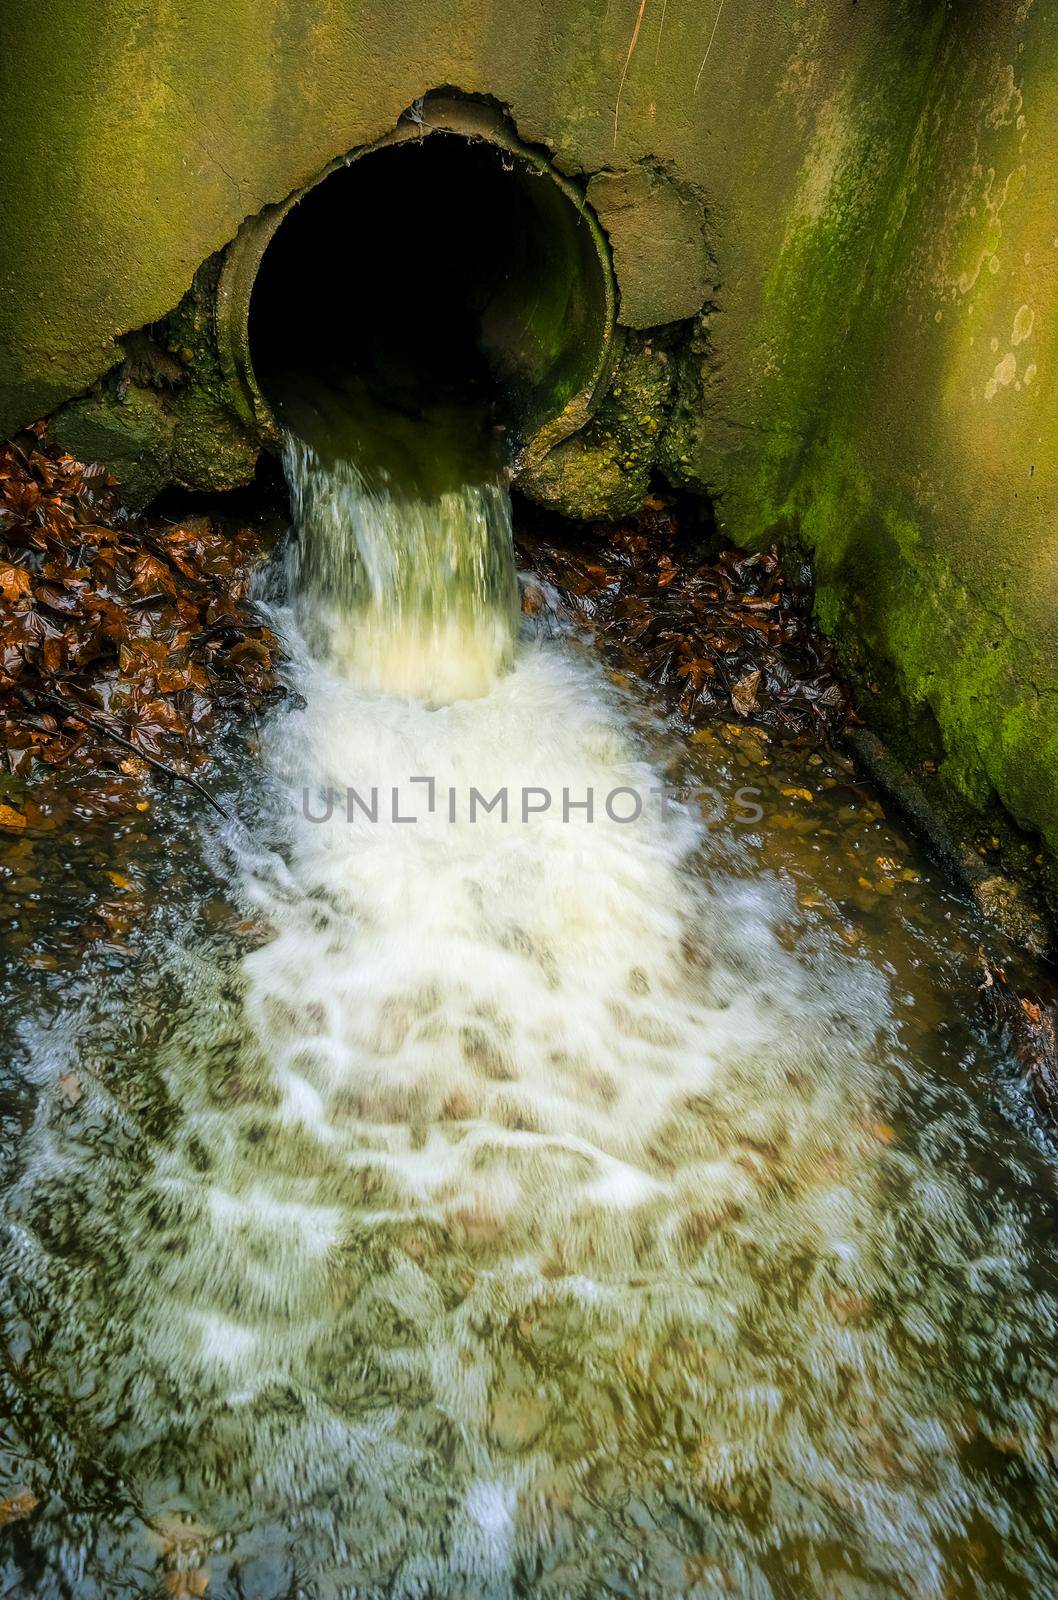 wastewater flows on the pipe